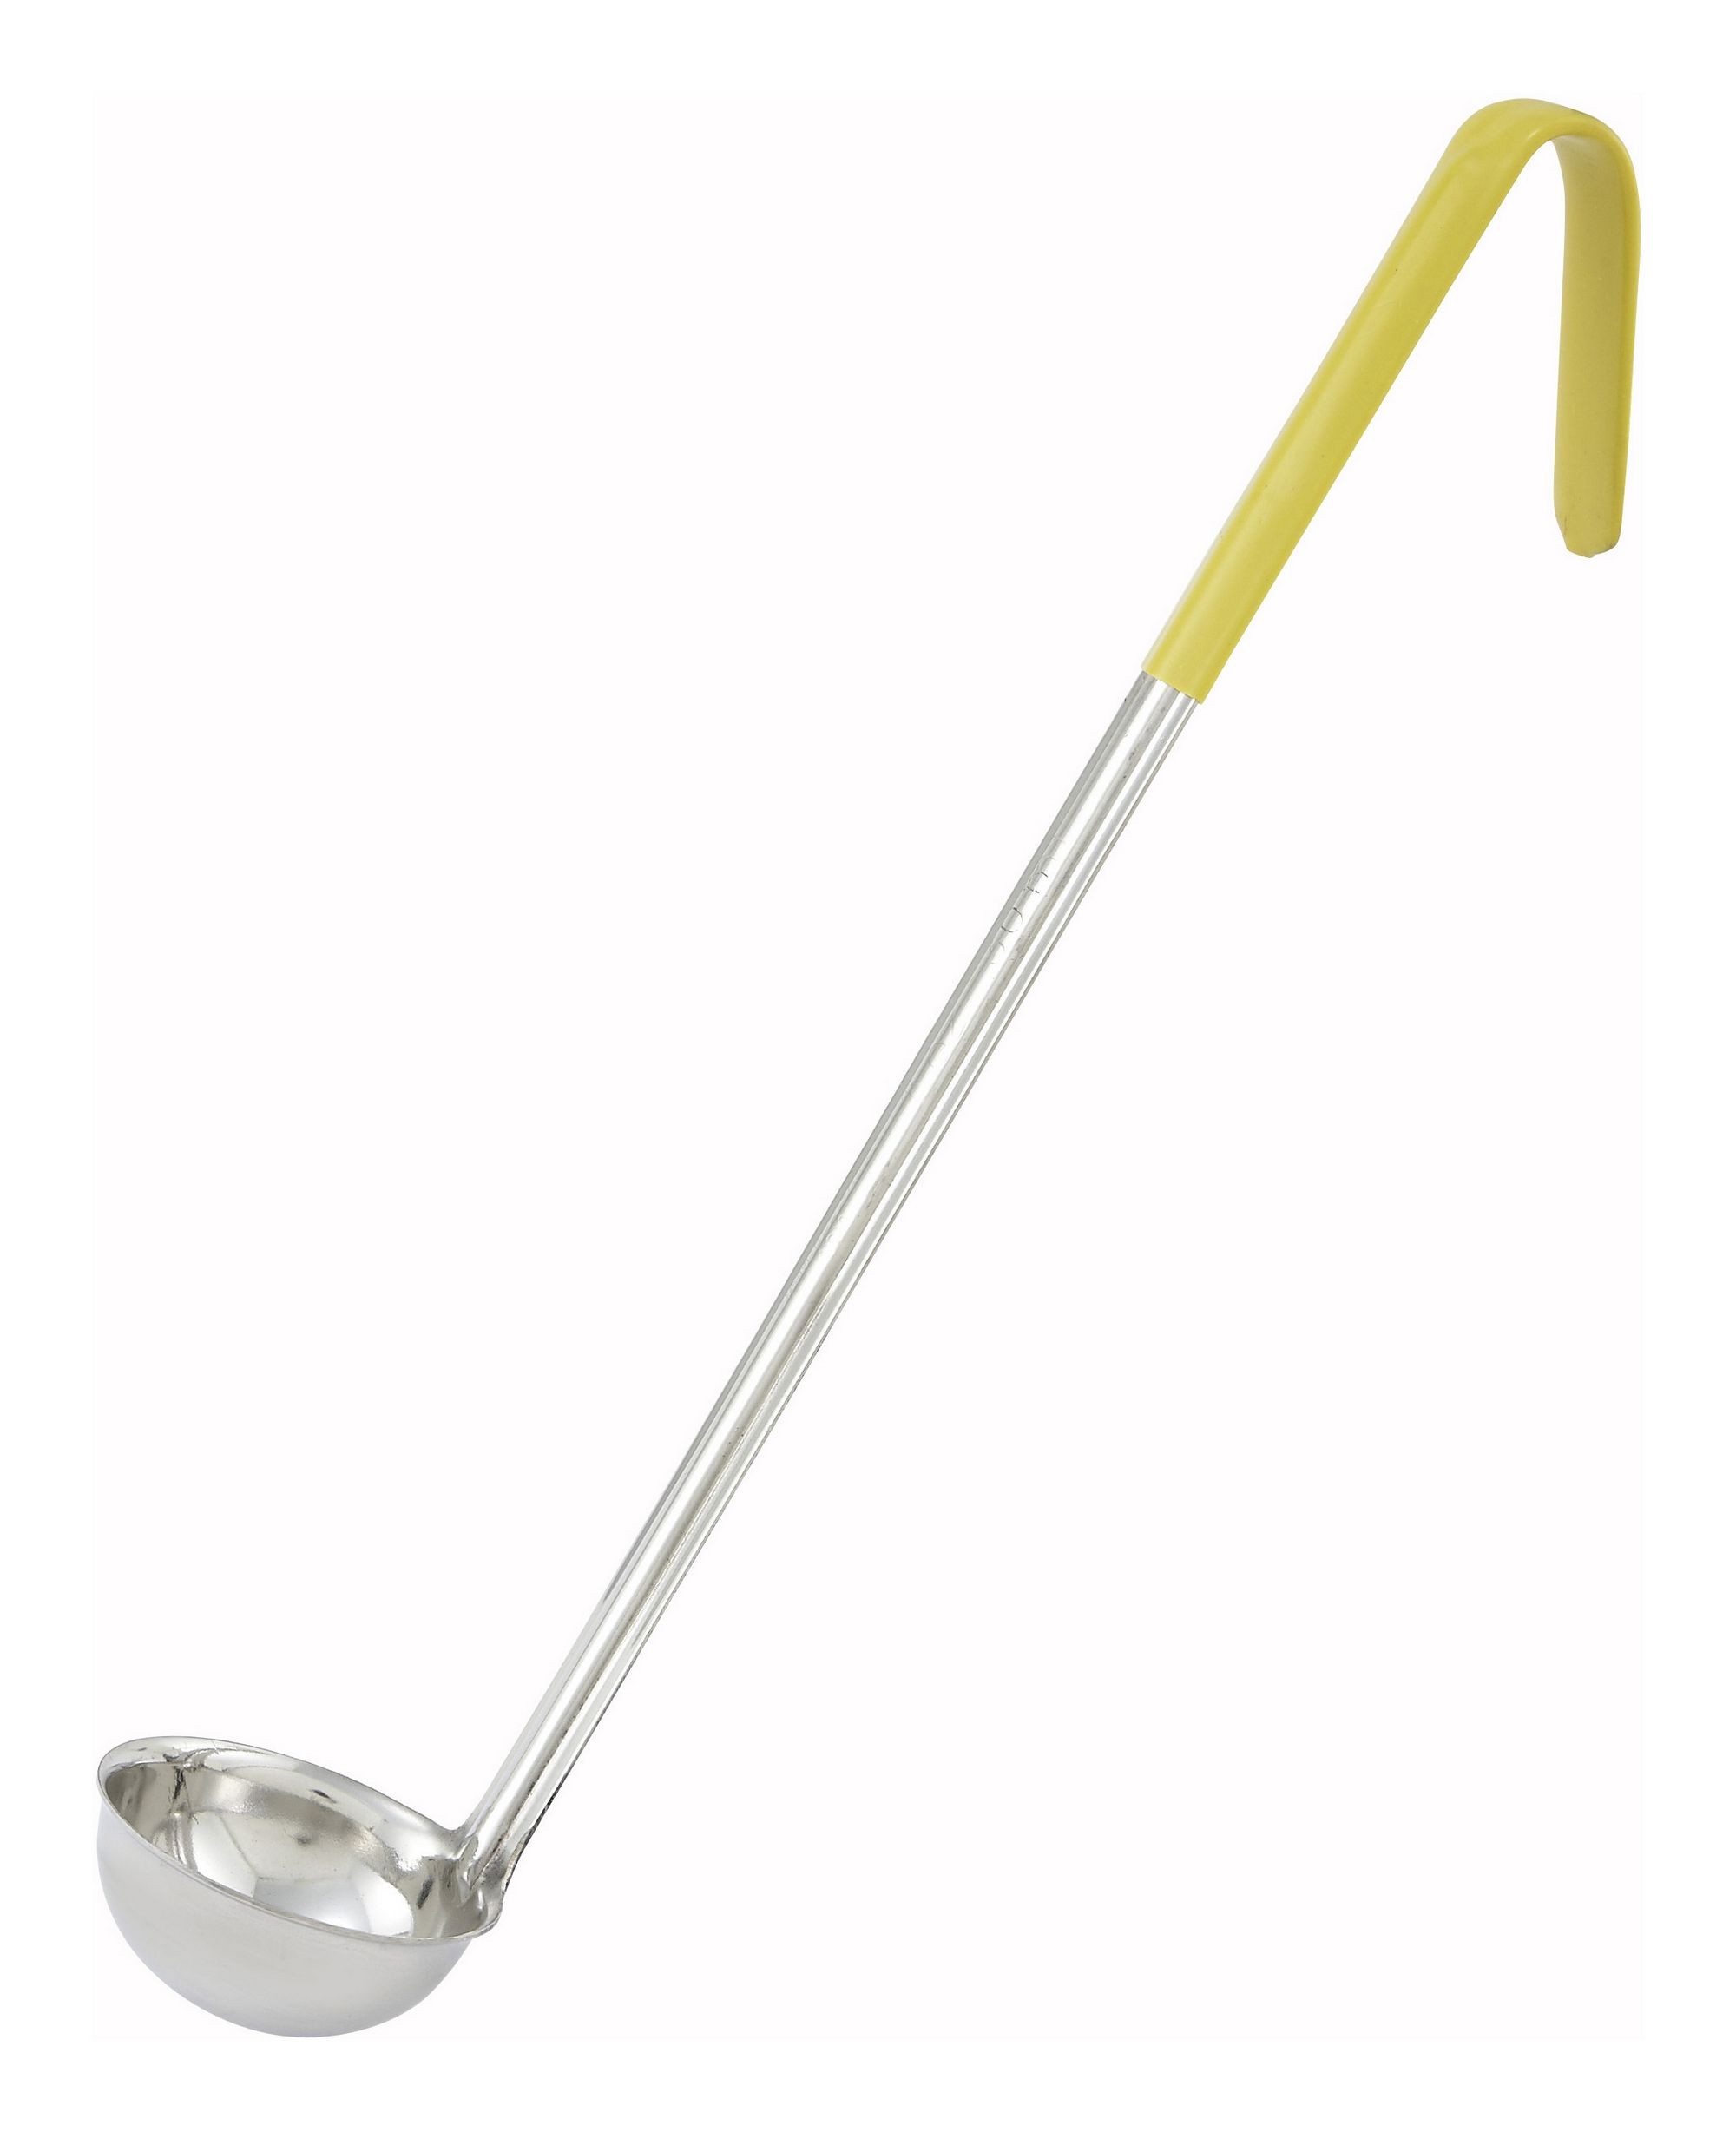 Winco LDC-1 Color-Coded Ladle 1 oz. with Yellow Handle